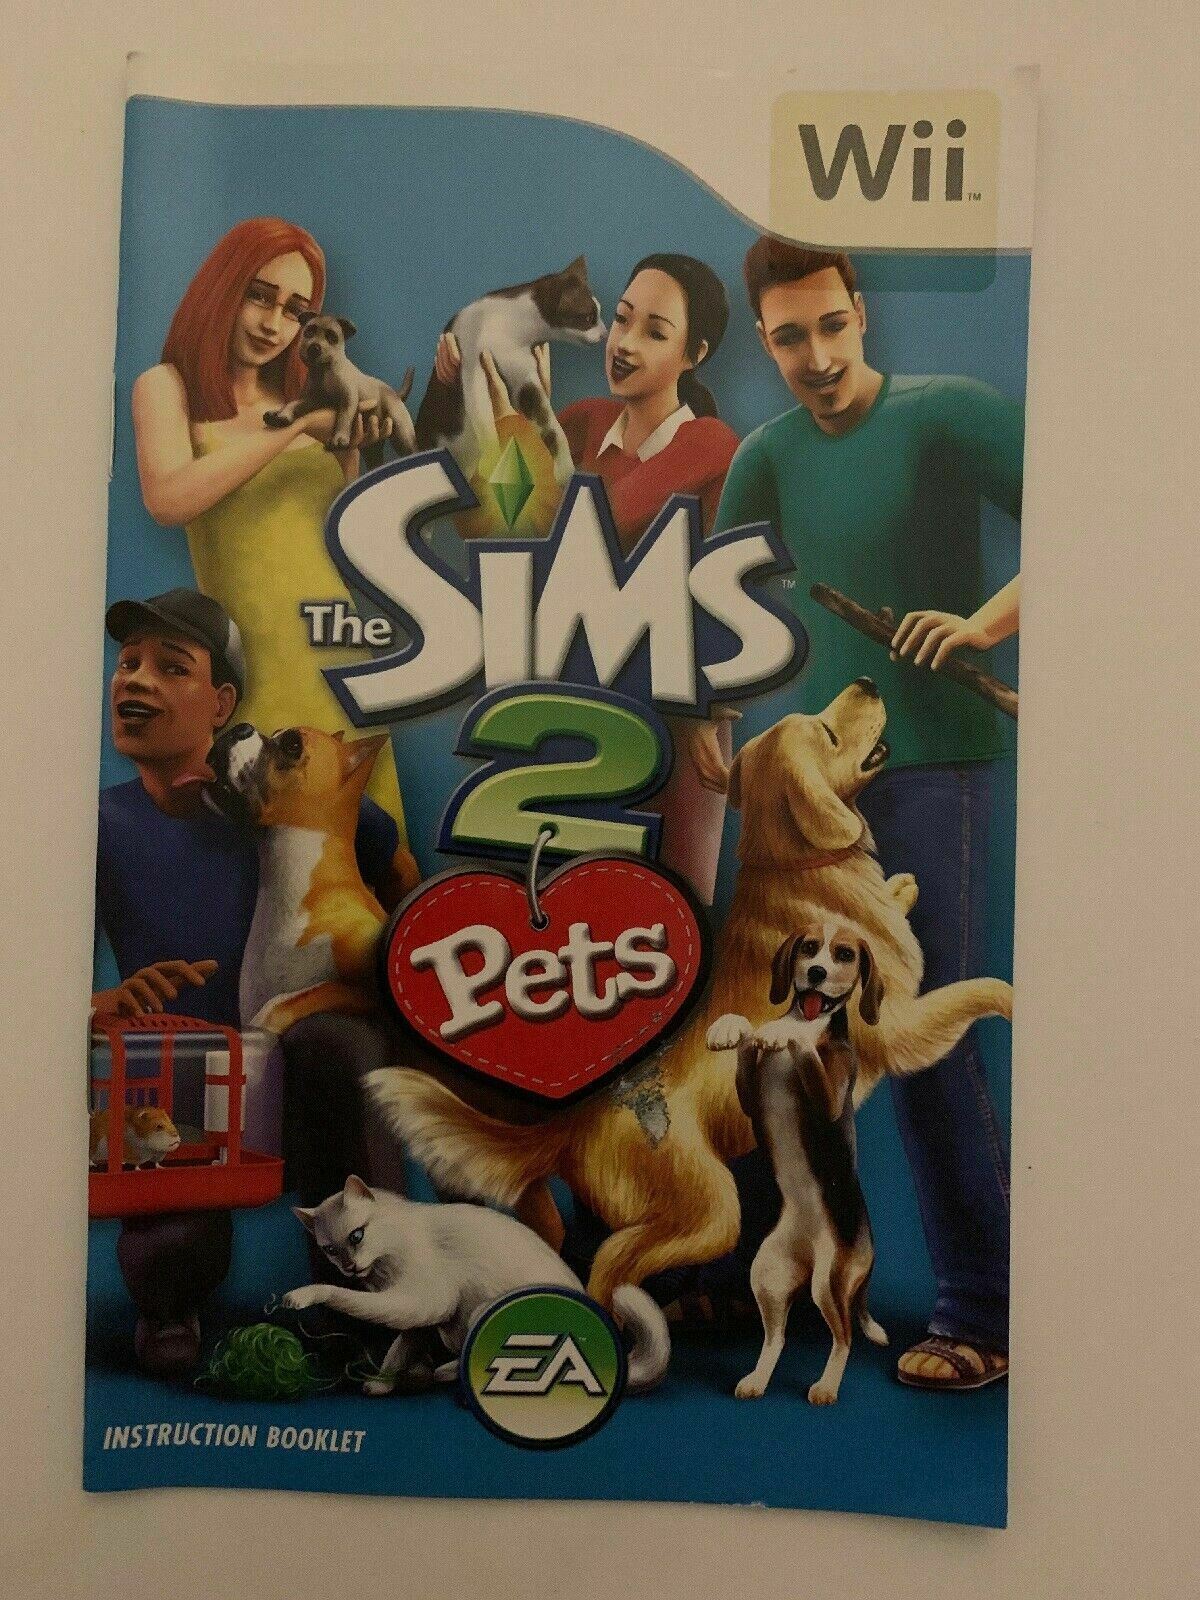 The Sims 2: Pets - Nintendo Wii PAL Game with Manual Complete